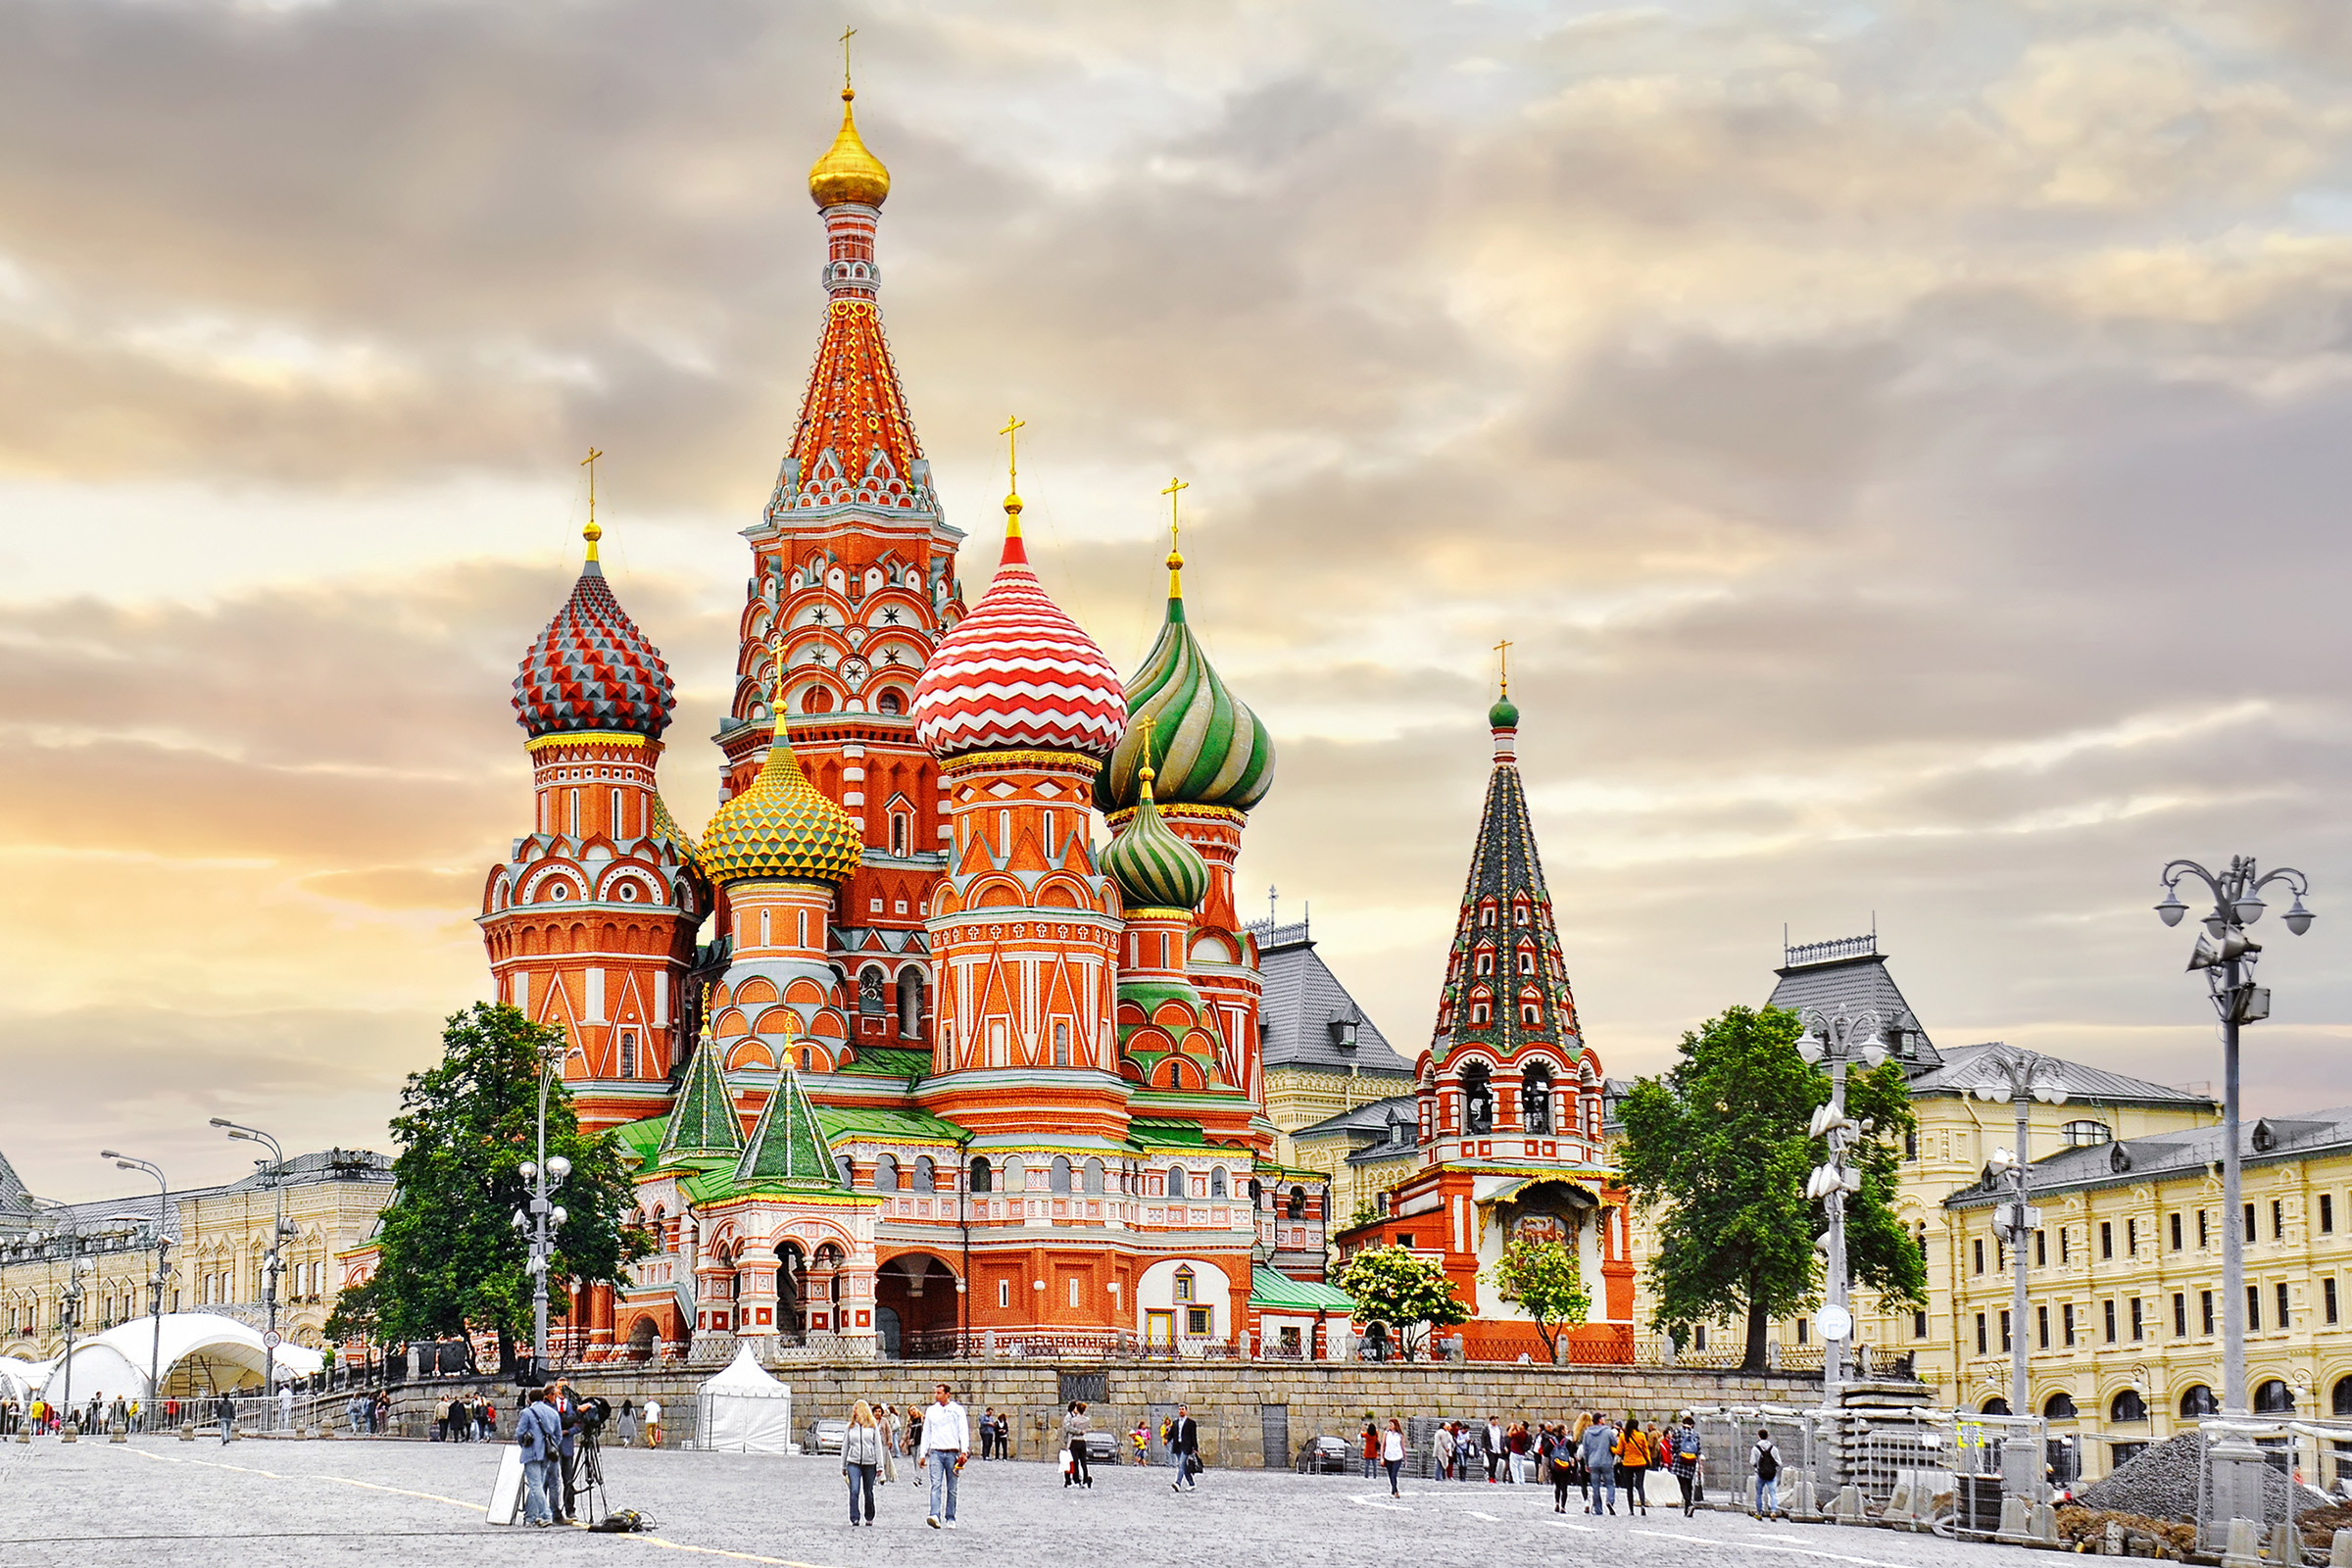 RussiaTour Packages - Book honeymoon ,family,adventure tour packages to Russia|Travel Knits